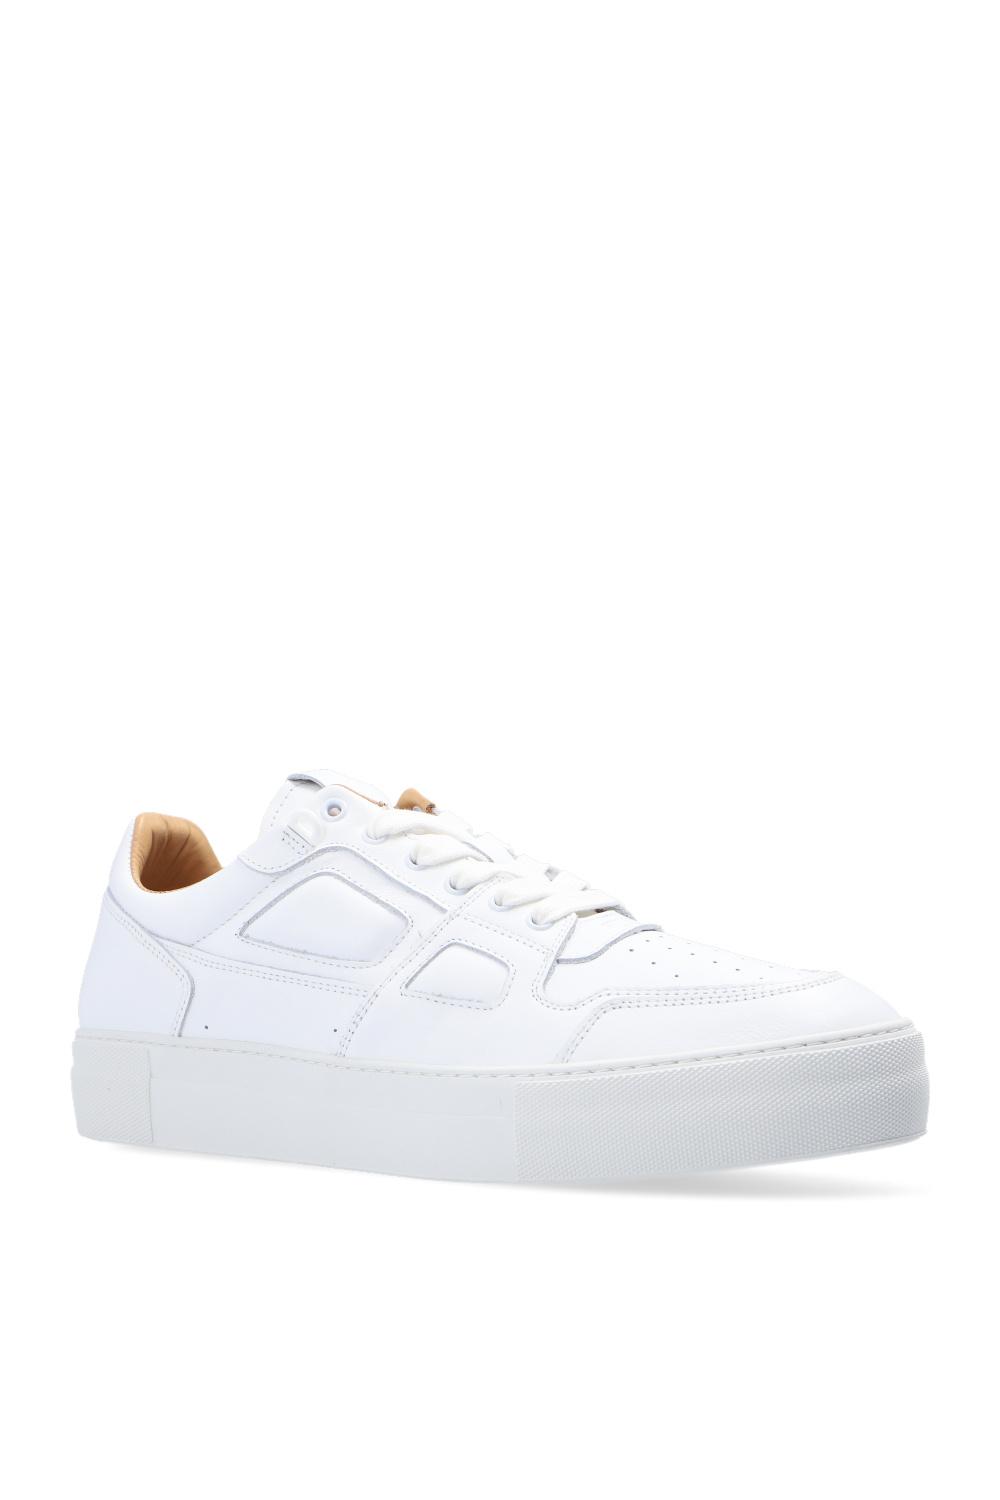 AMI Leather Sneakers in White for Men - Lyst